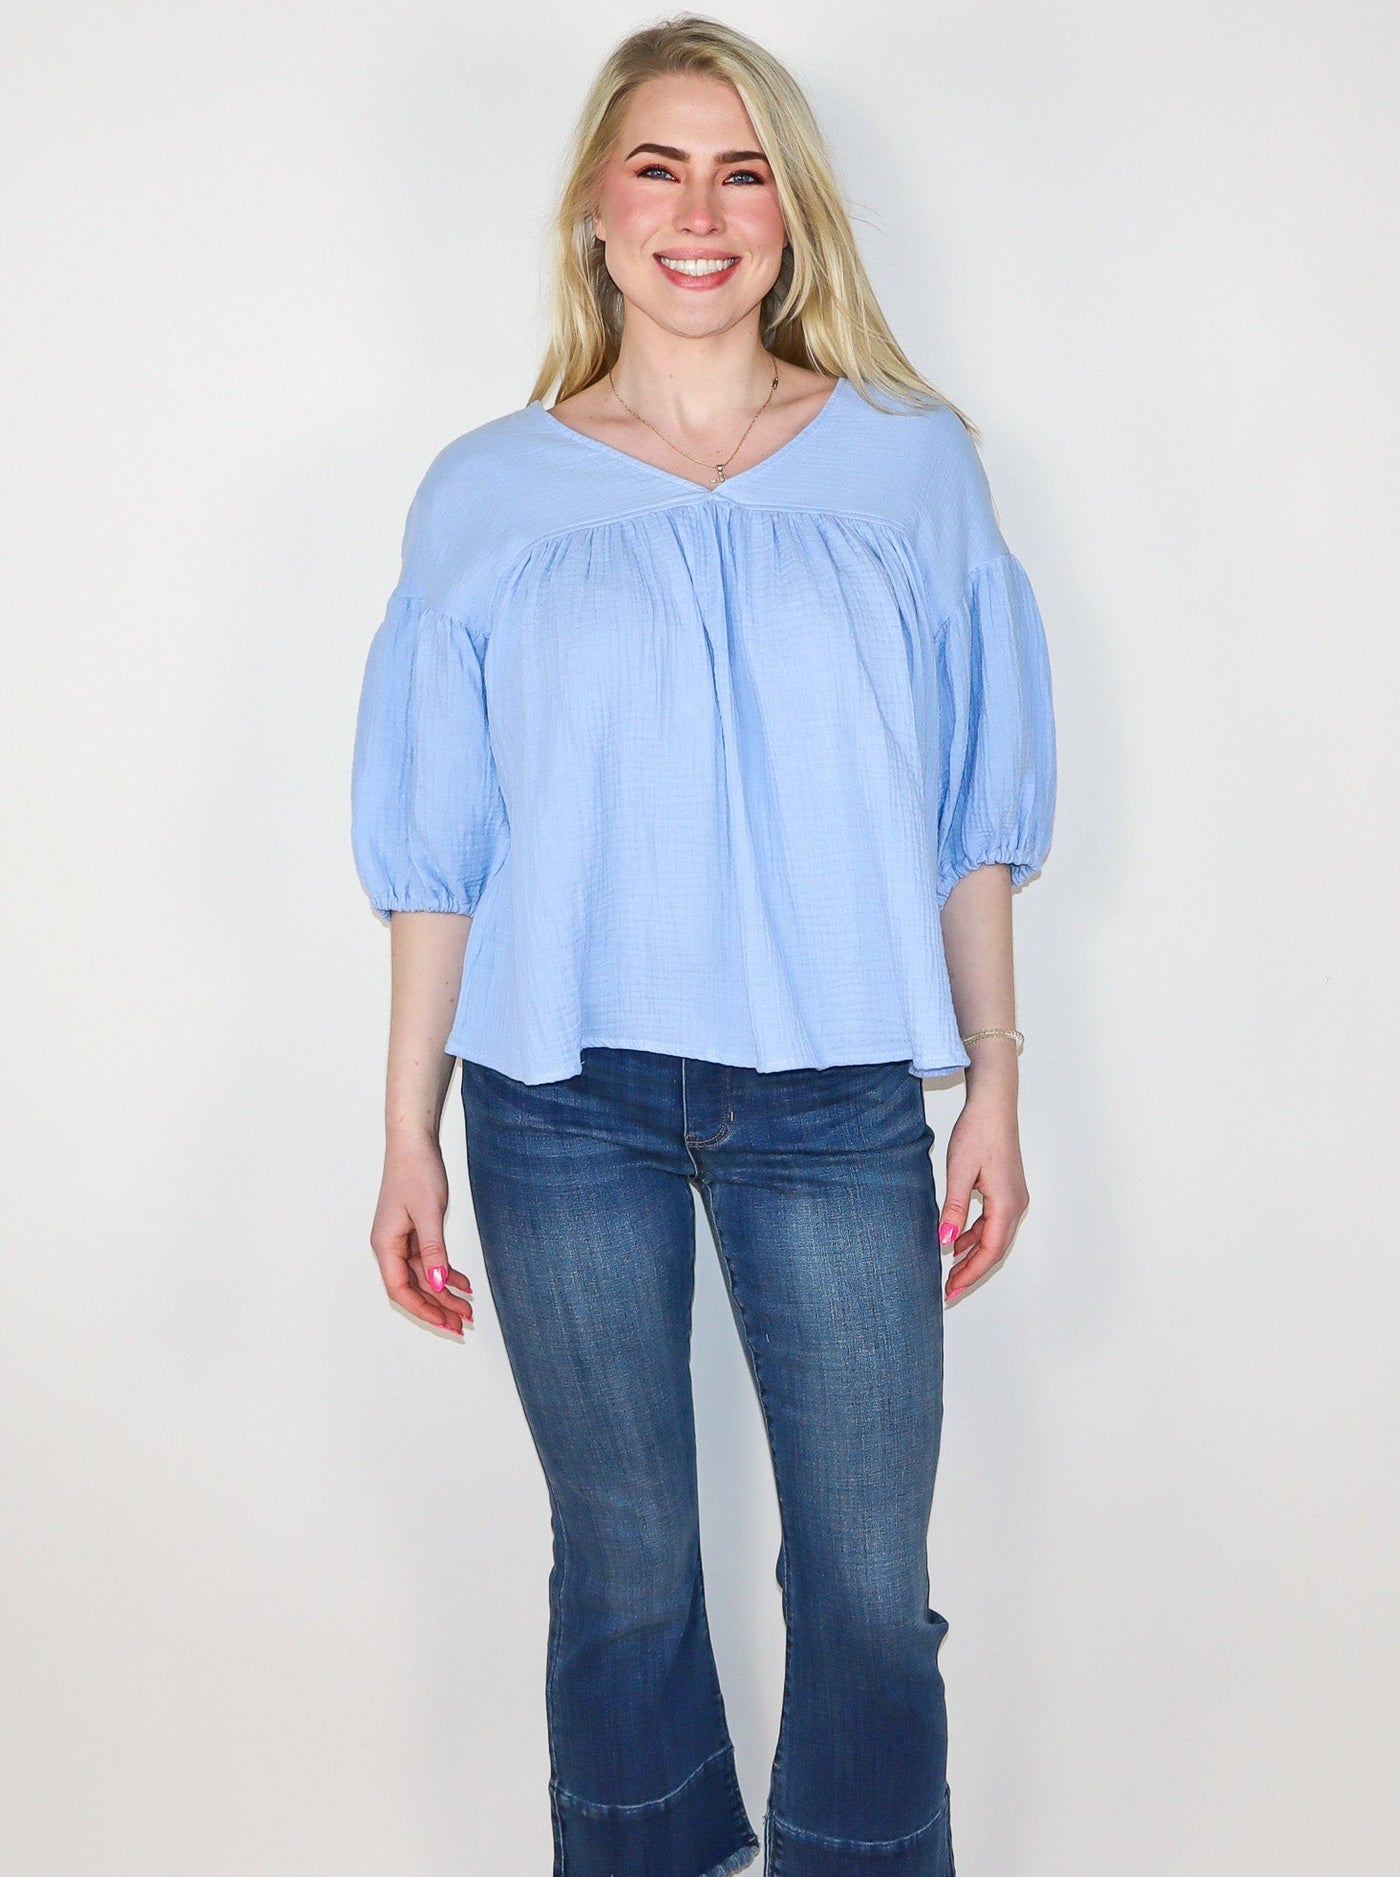 Model is wearing a baby blue flowey V neck half sleeve top. Sleeves are cinched and puffy. Top is paired with blue jeans. 